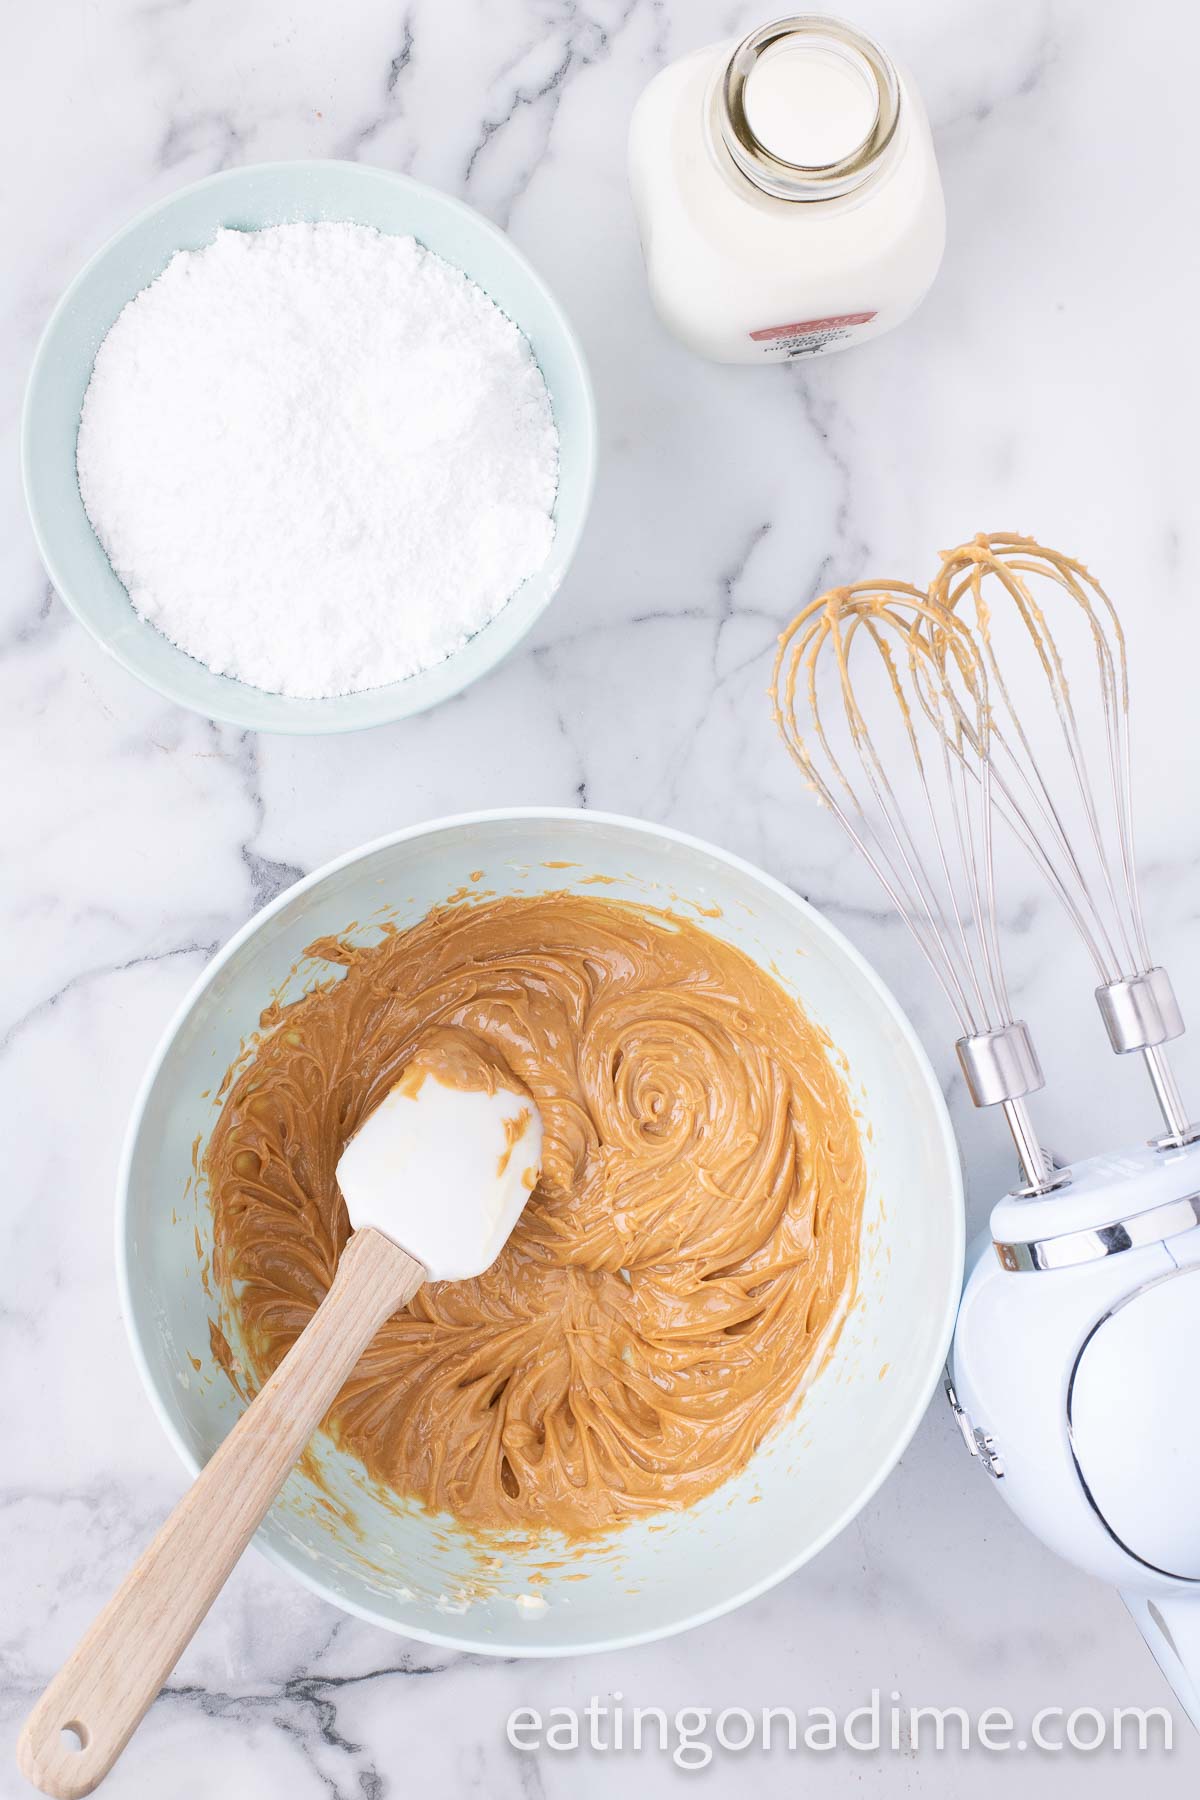 Beating powdered sugar into the peanut butter mixture